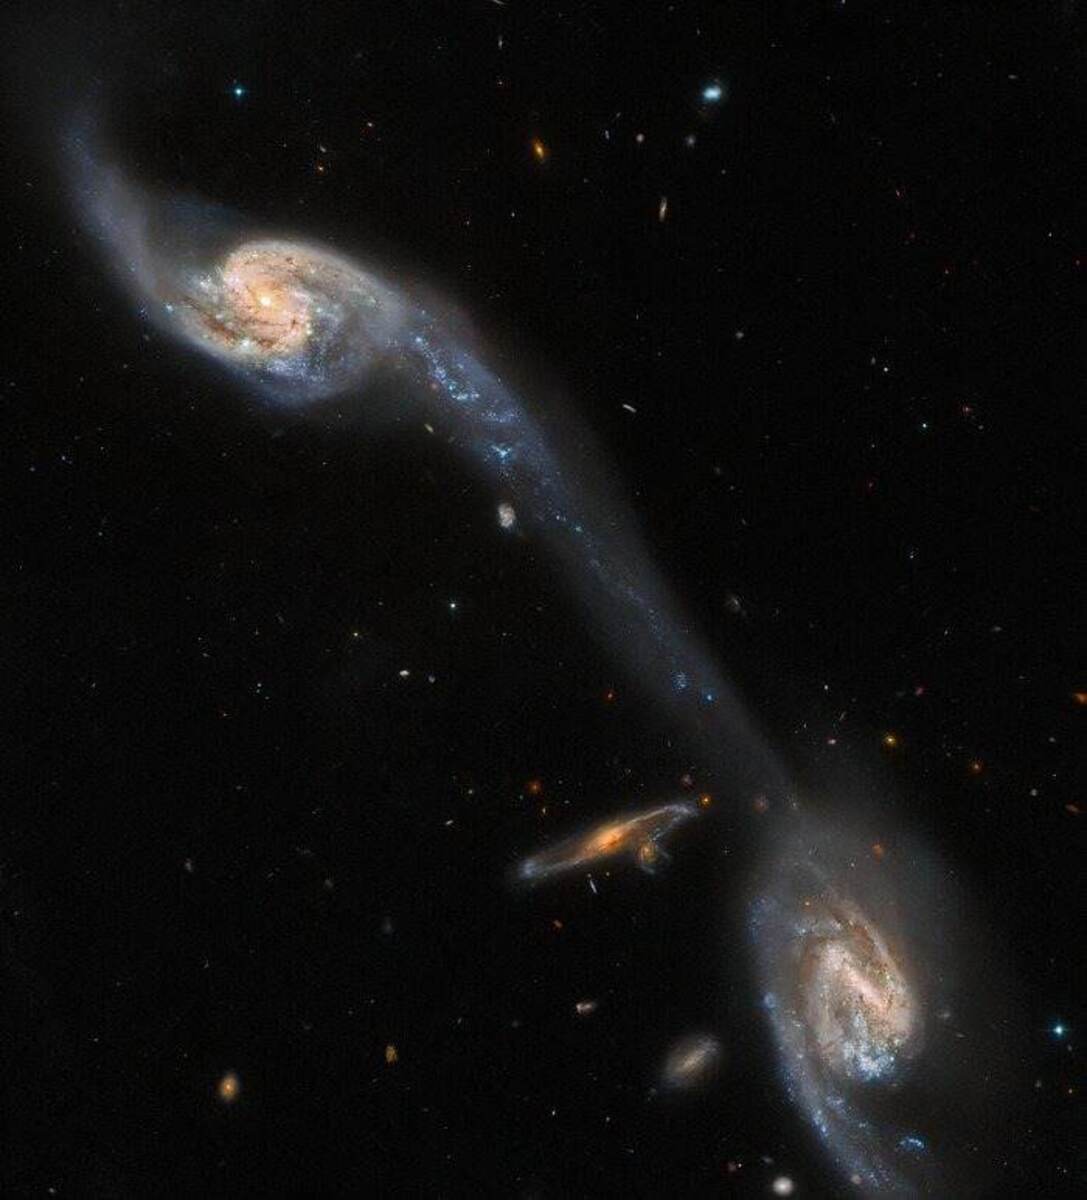 Galactic system Arp 248, known as Wild's Triplet